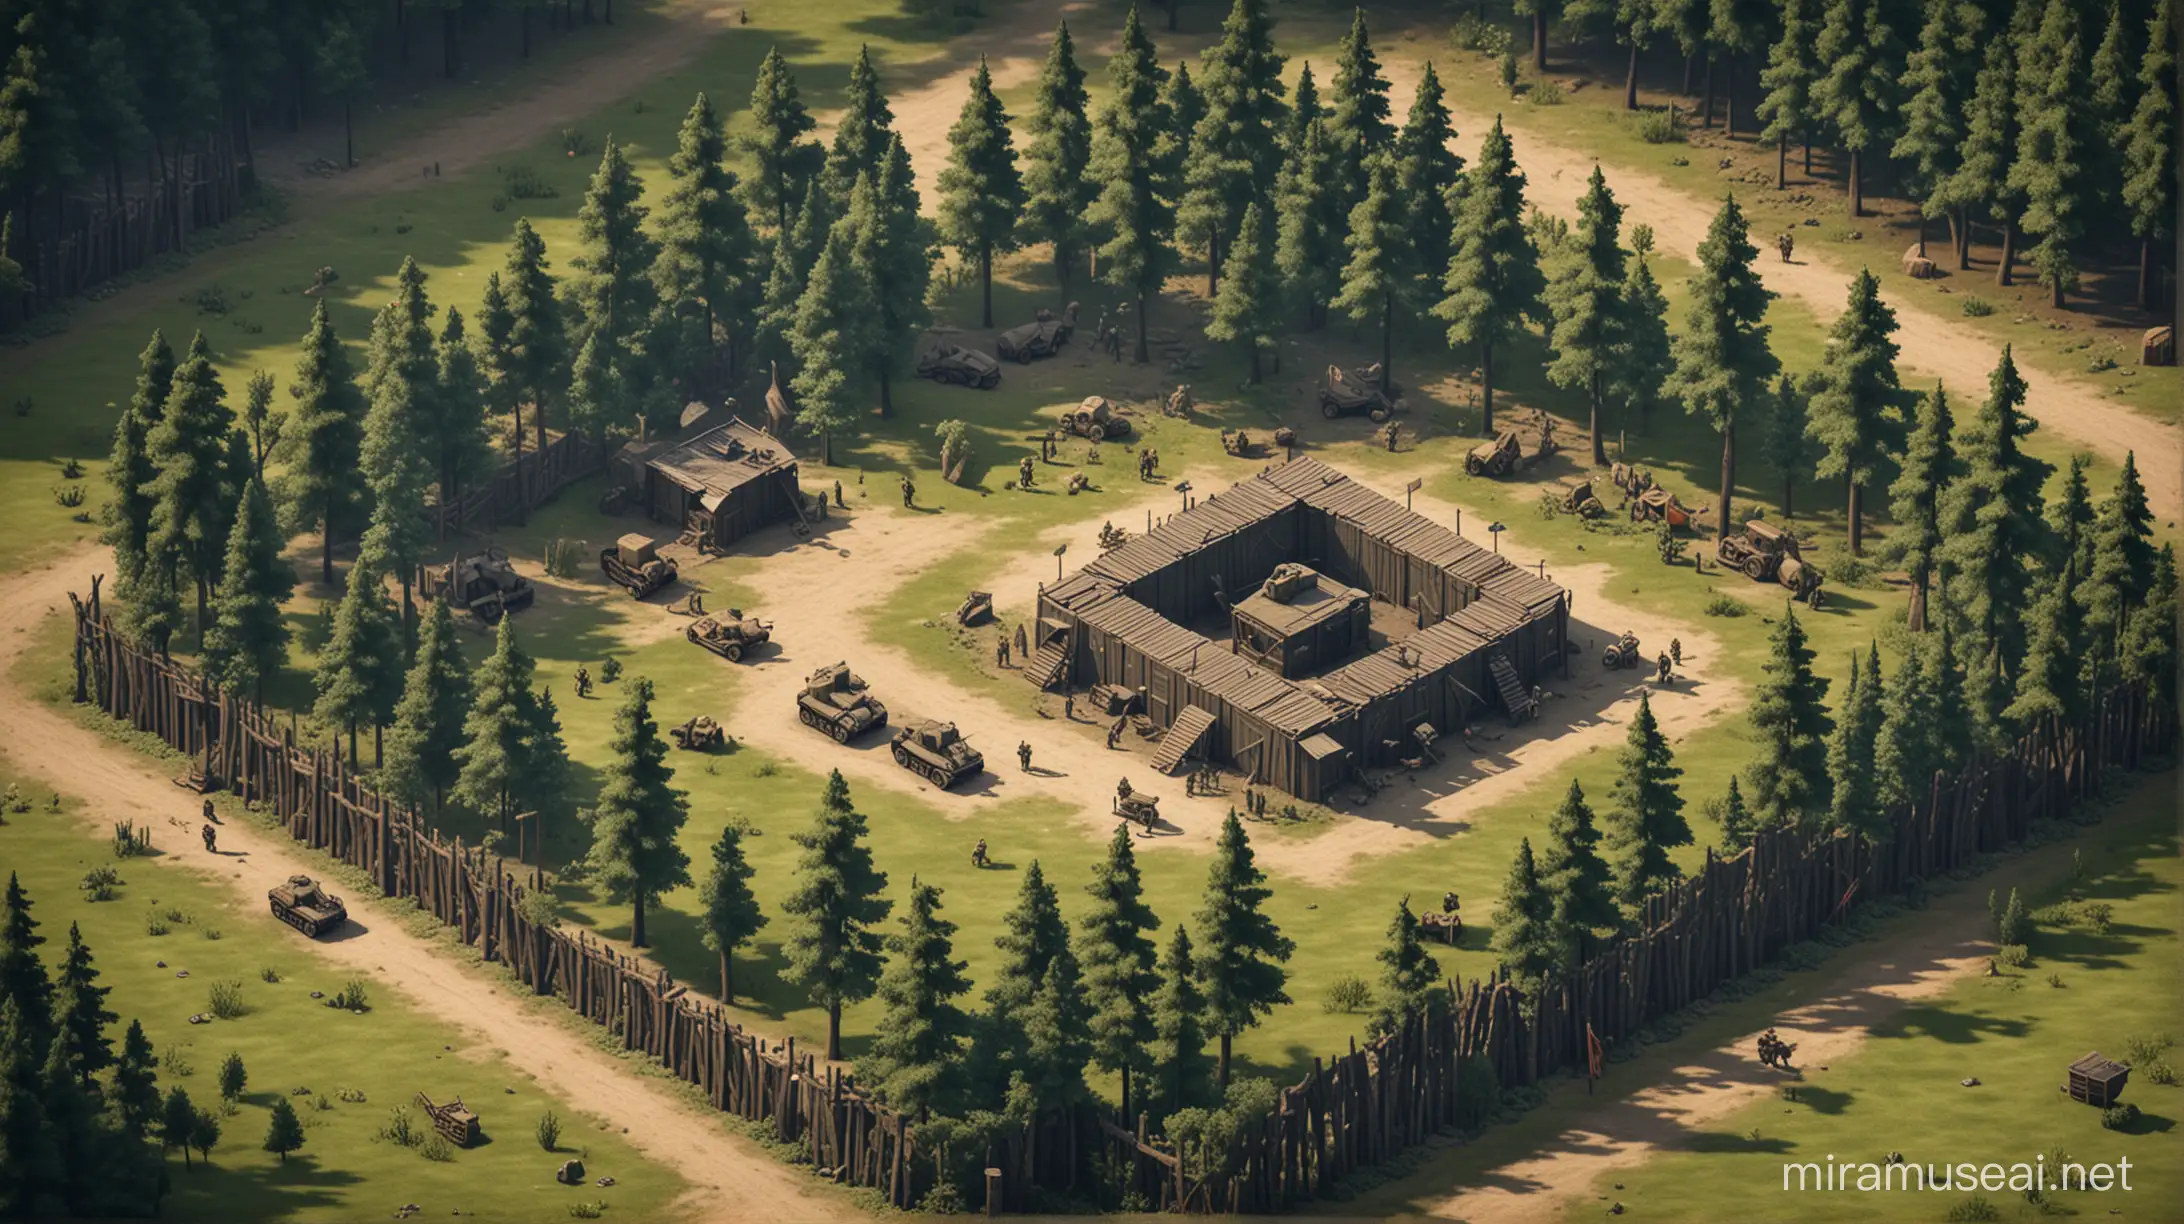 WW2Themed Isometric Square Forest Arena